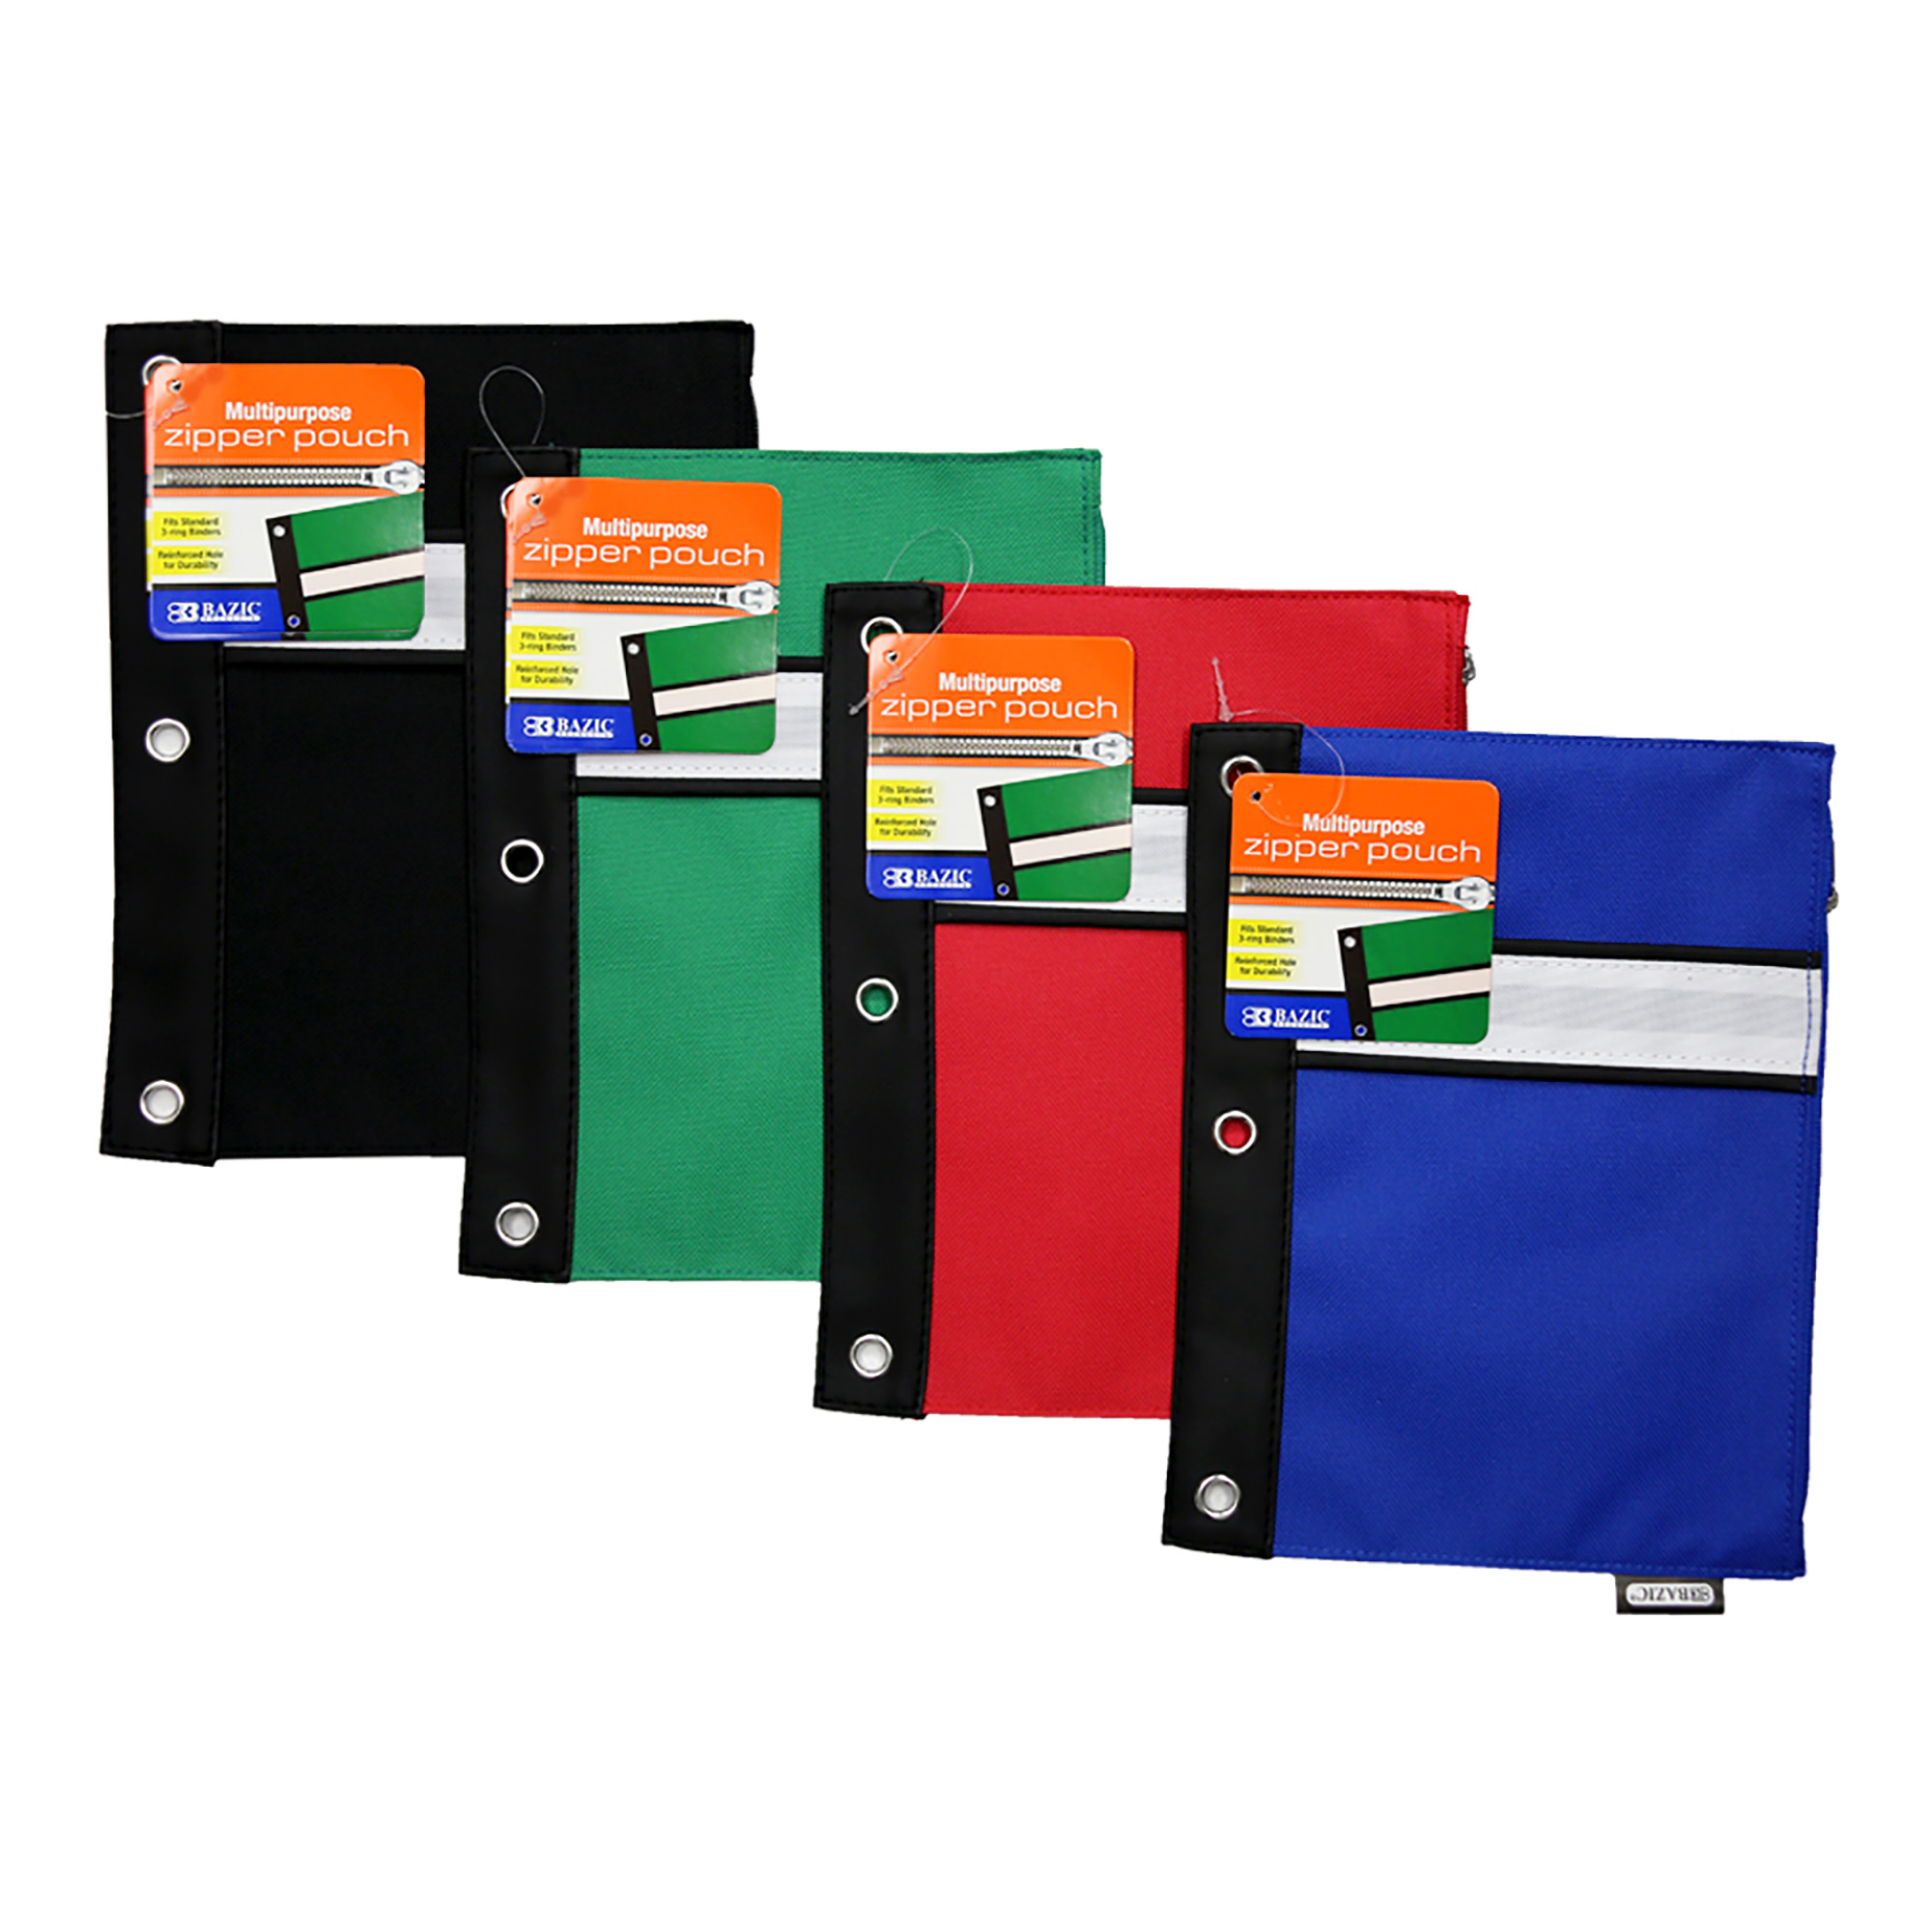 Trailmaker, 96 Pack of 3 Ring Canvas Cloth Pencil Pouches in Bulk Assorted  Color Bundles - 4 Colors 